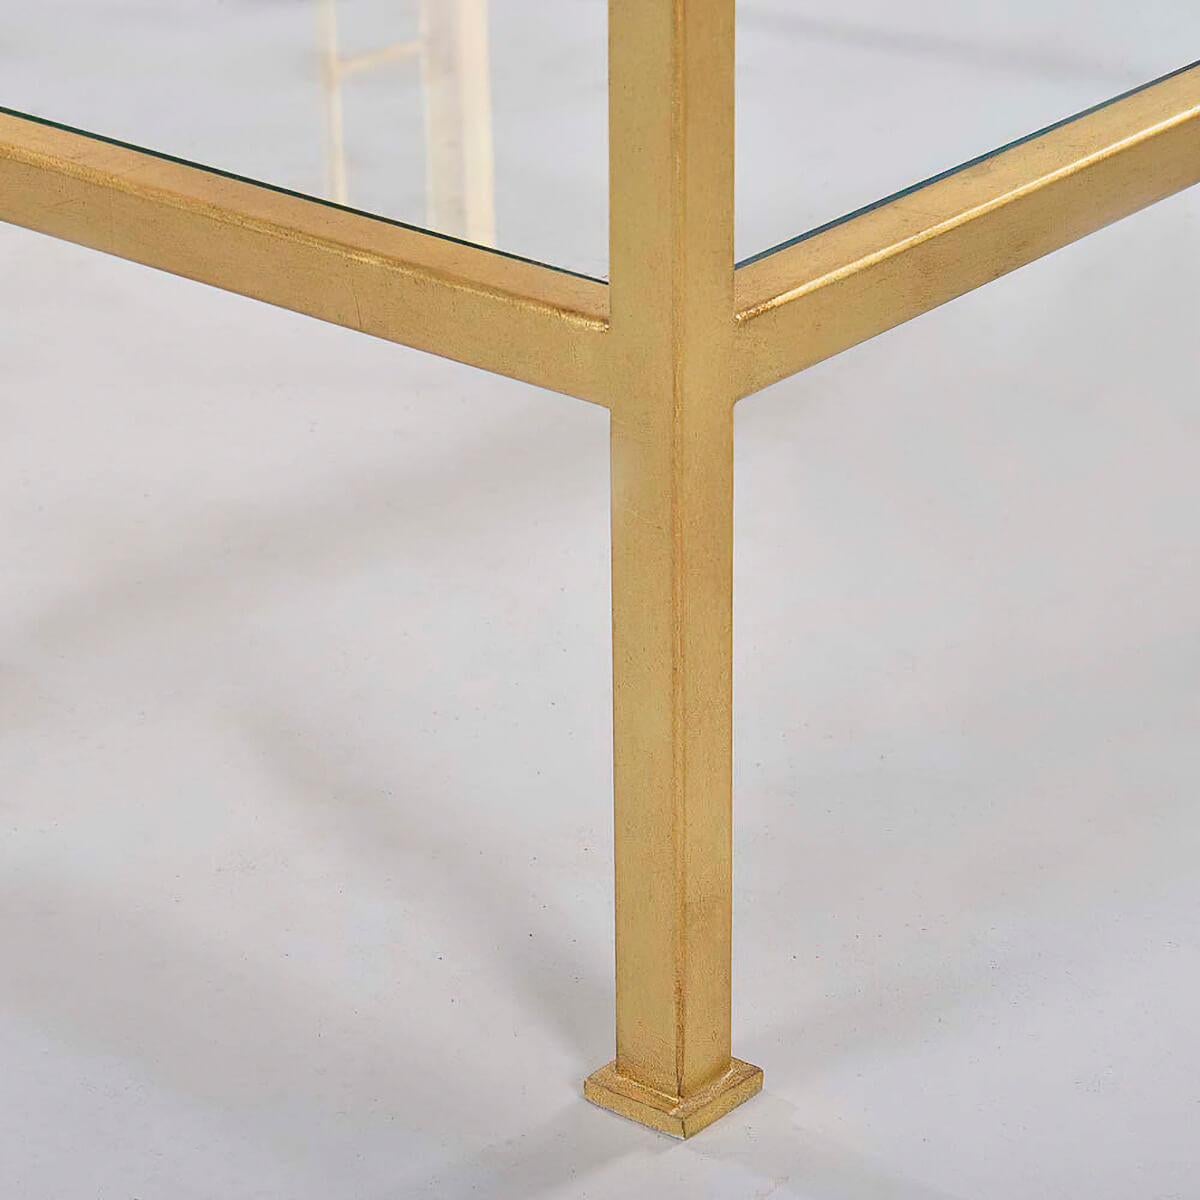 Midcentury style rectangle coffee table with clear tempered glass top and shelf, straight legs, and portrait frame detail on the table sides, has a “gold leaf” finish on a steel frame.

Dimensions: 48